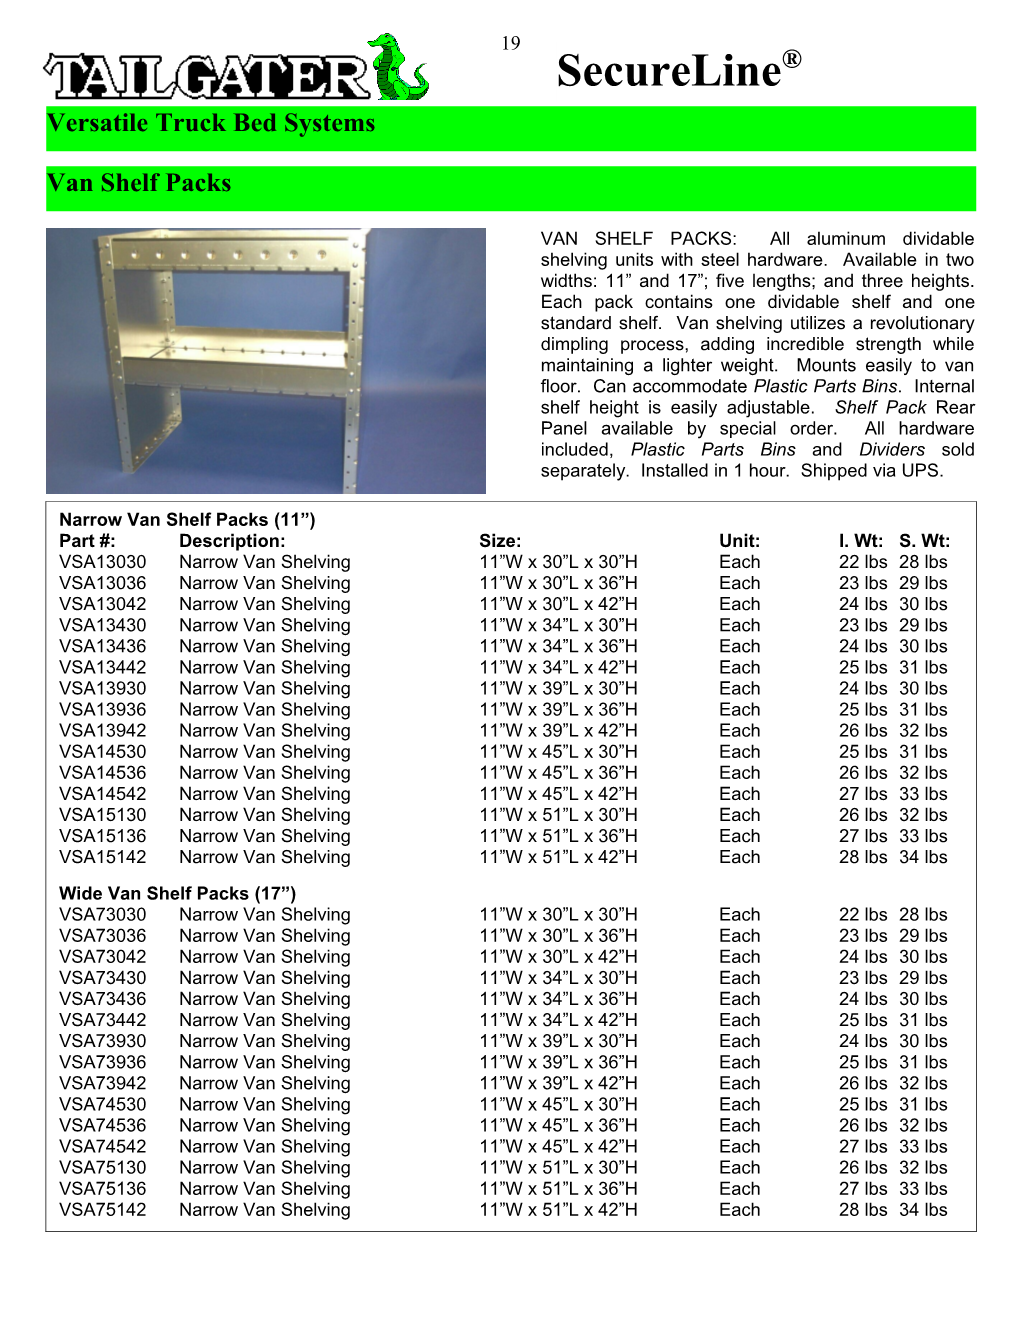 VAN SHELF PACKS: All Aluminum Dividable Shelving Units with Steel Hardware. Available In